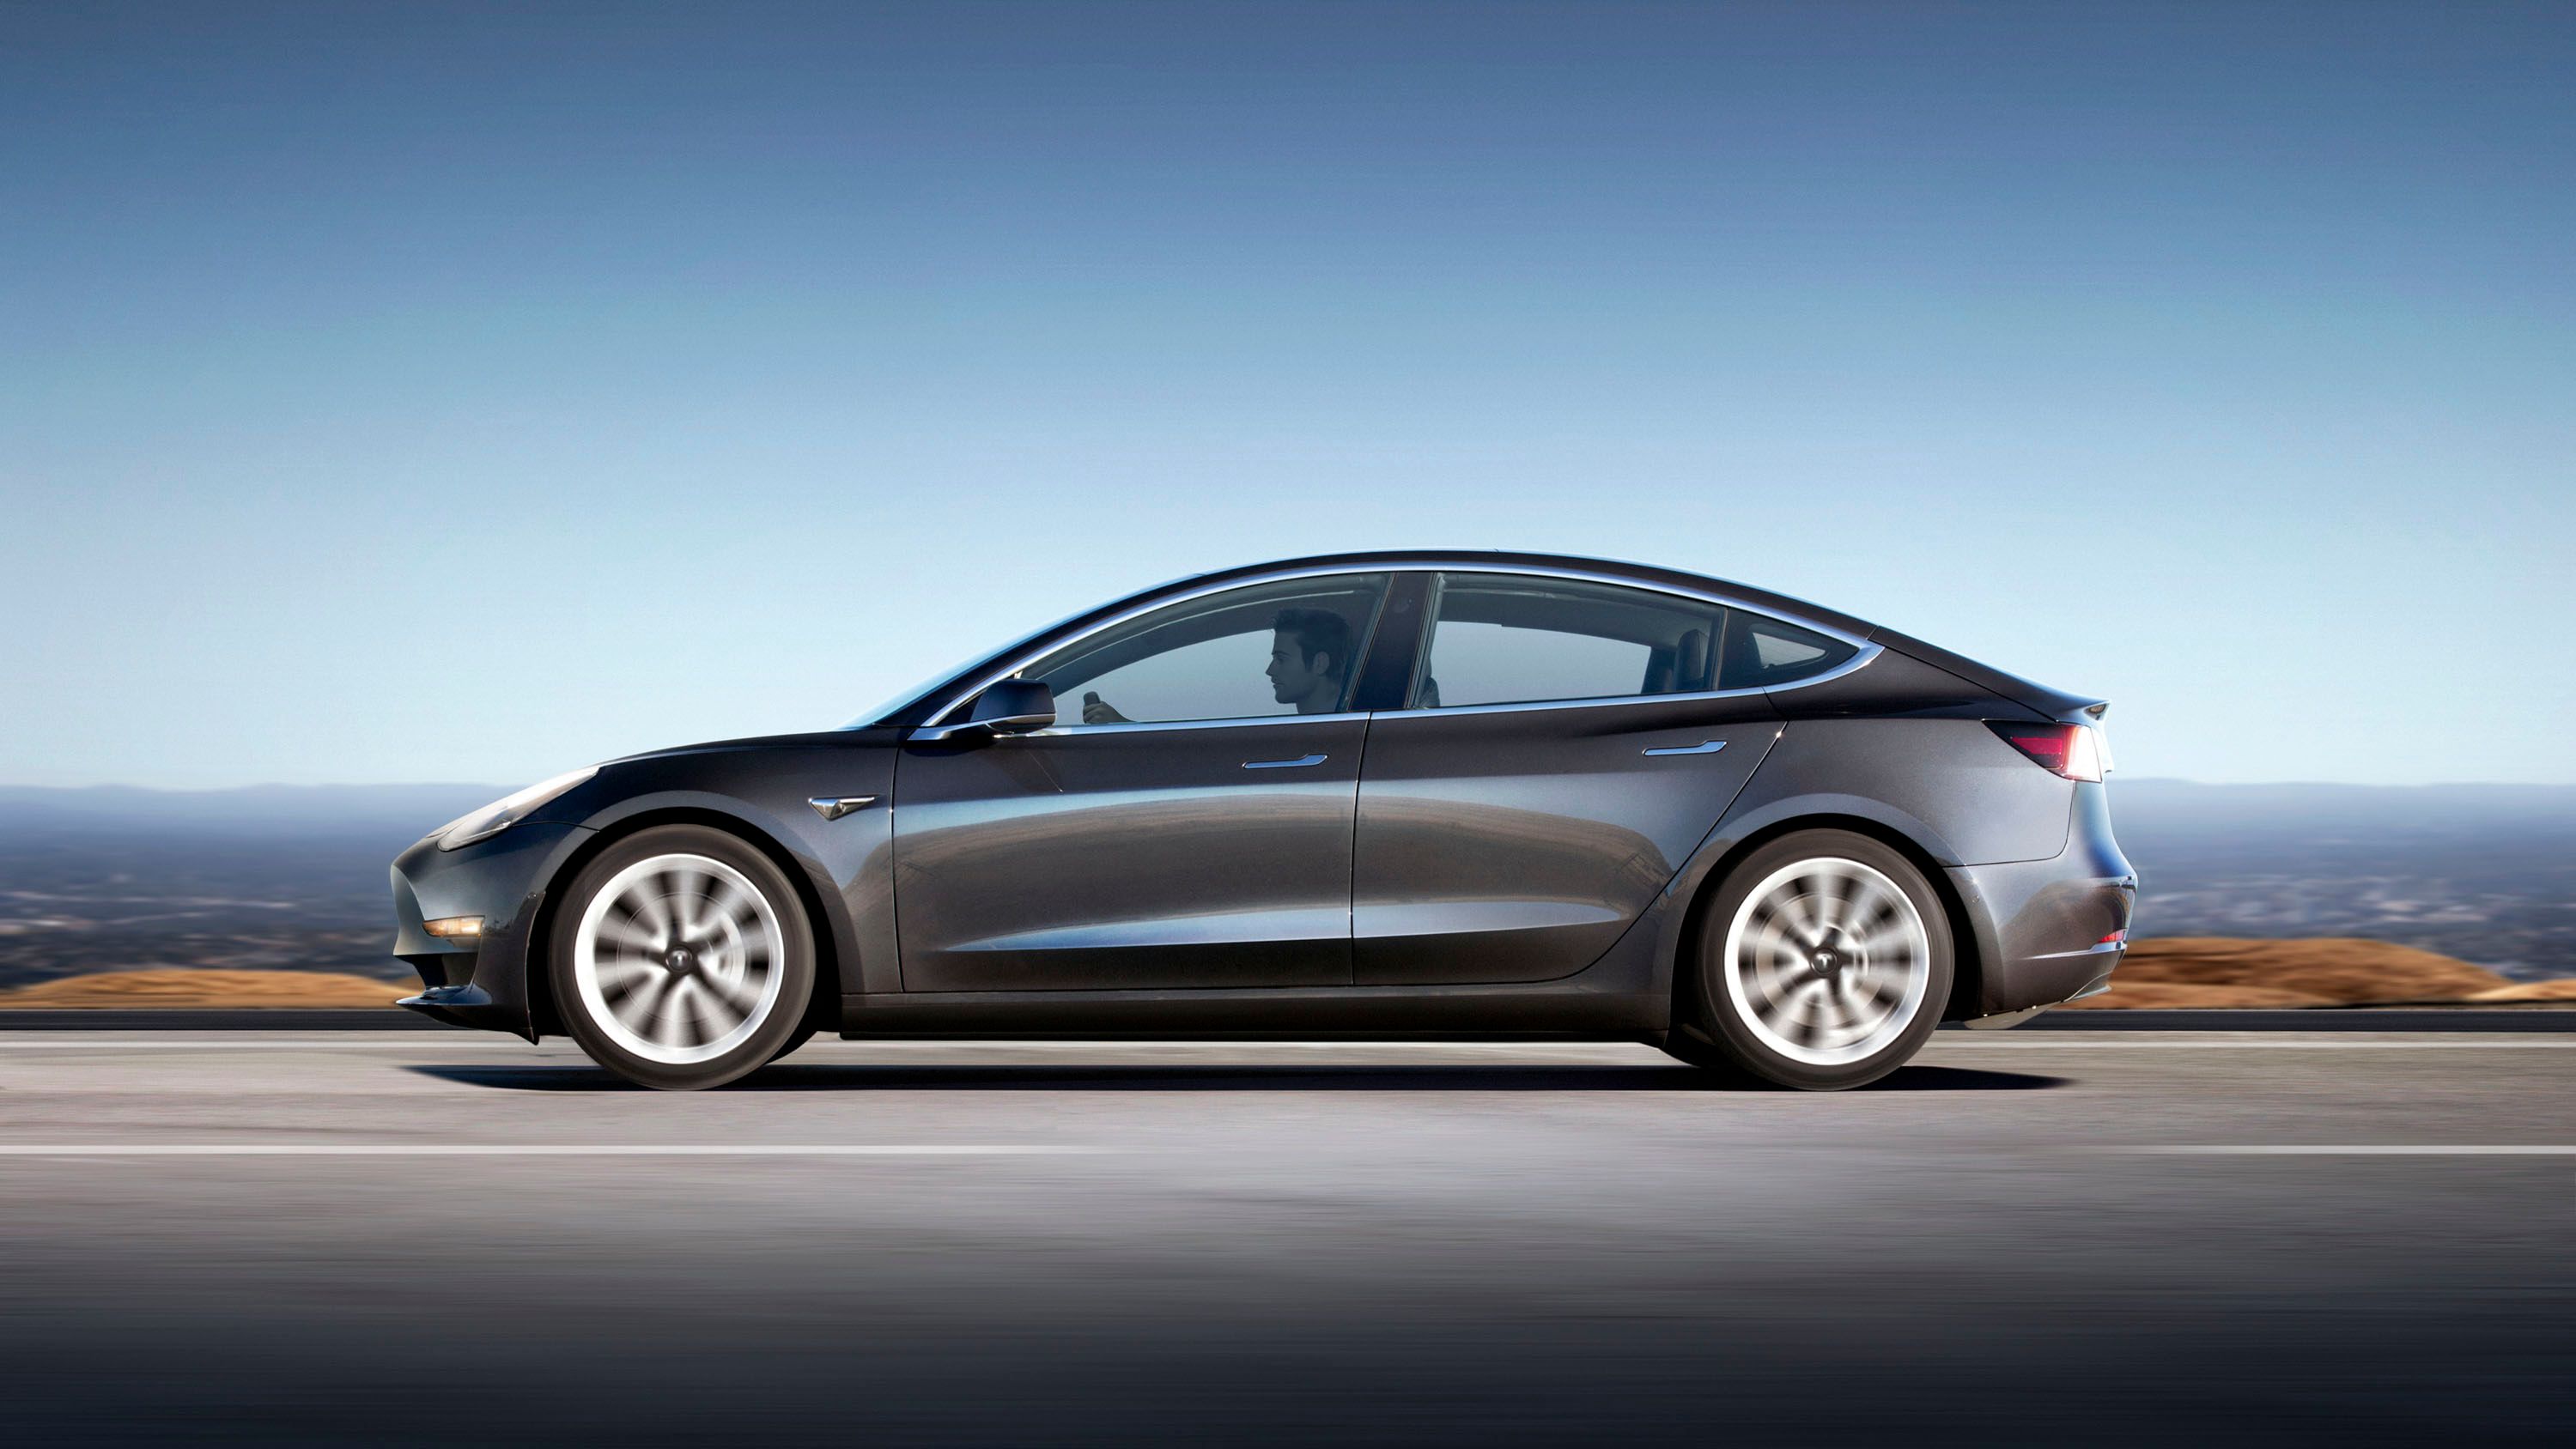 2017 The Tesla Model 3 Is Designed For Fully Autonomous Operation, So Where Are The Robo Chauffeurs?